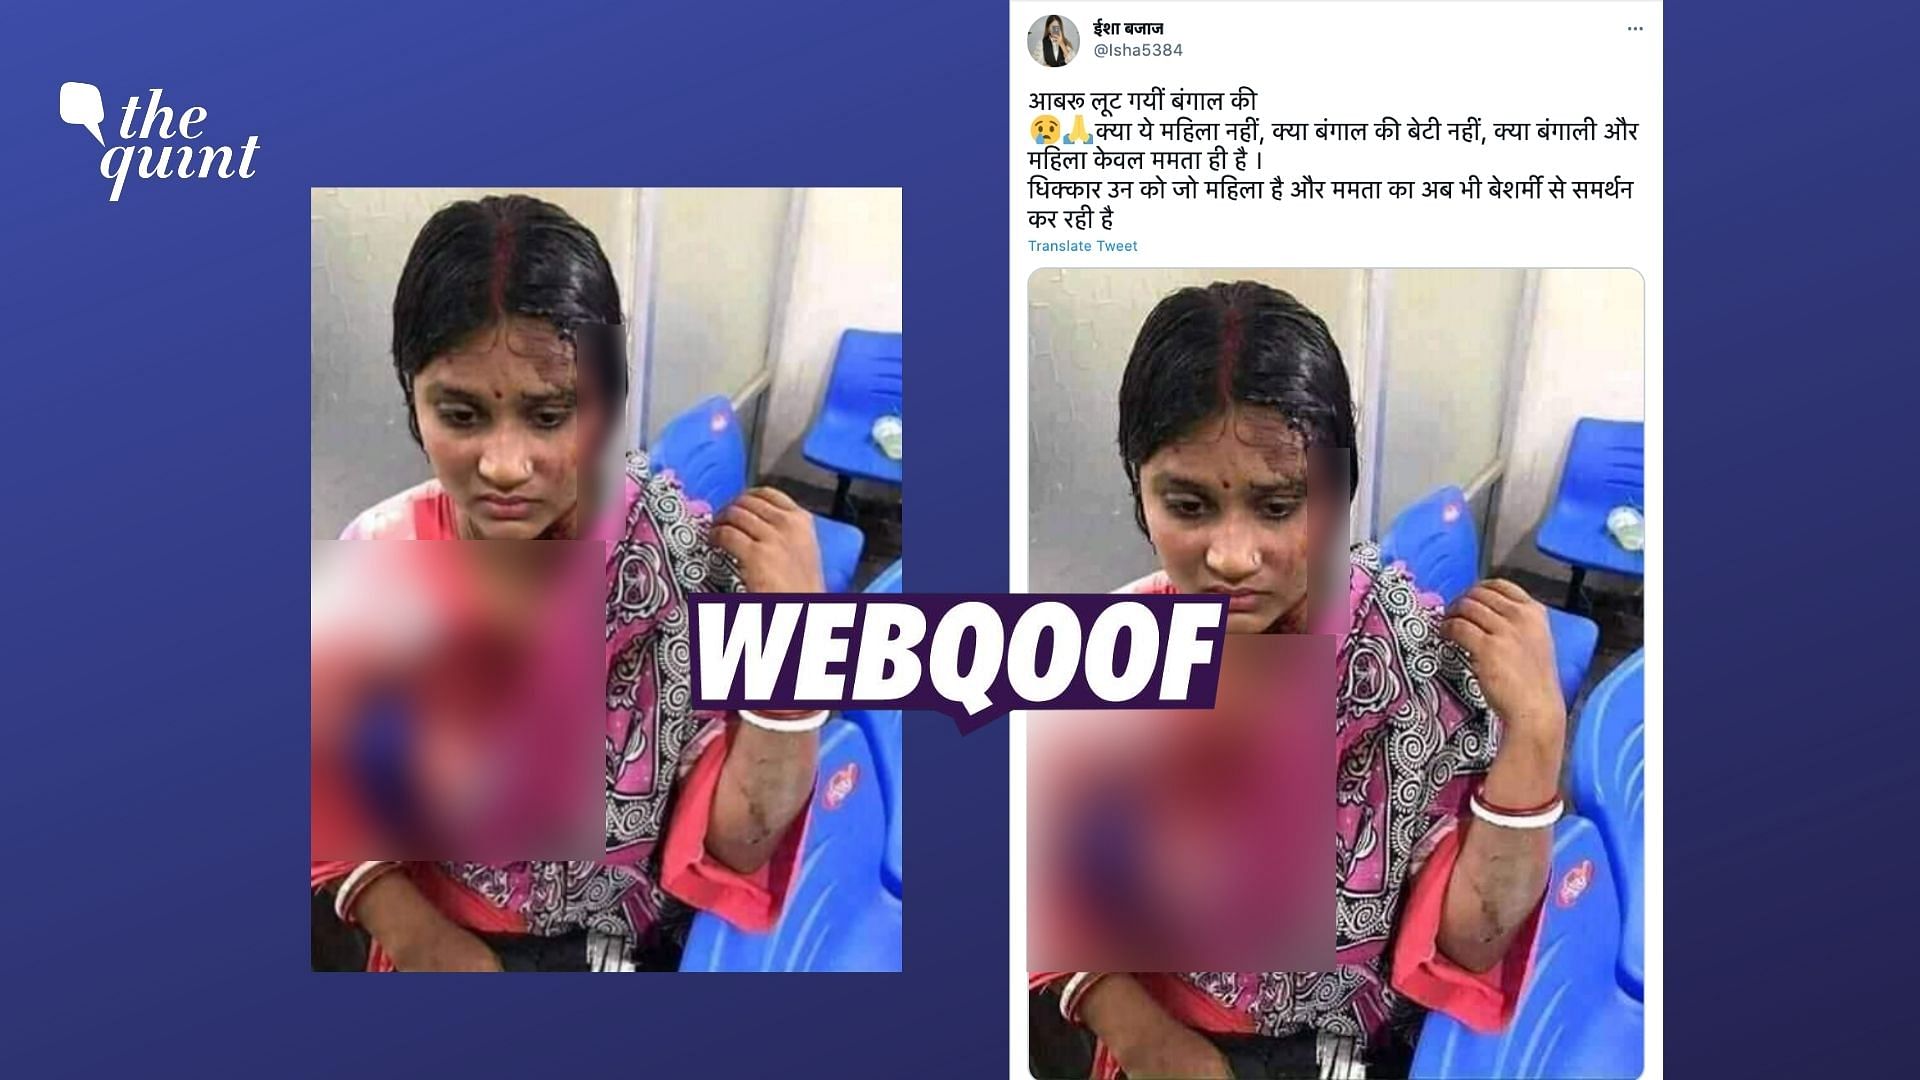 An old image of a woman who was injured in an incident that took place in Bangladesh was falsely claimed to be from West Bengal.